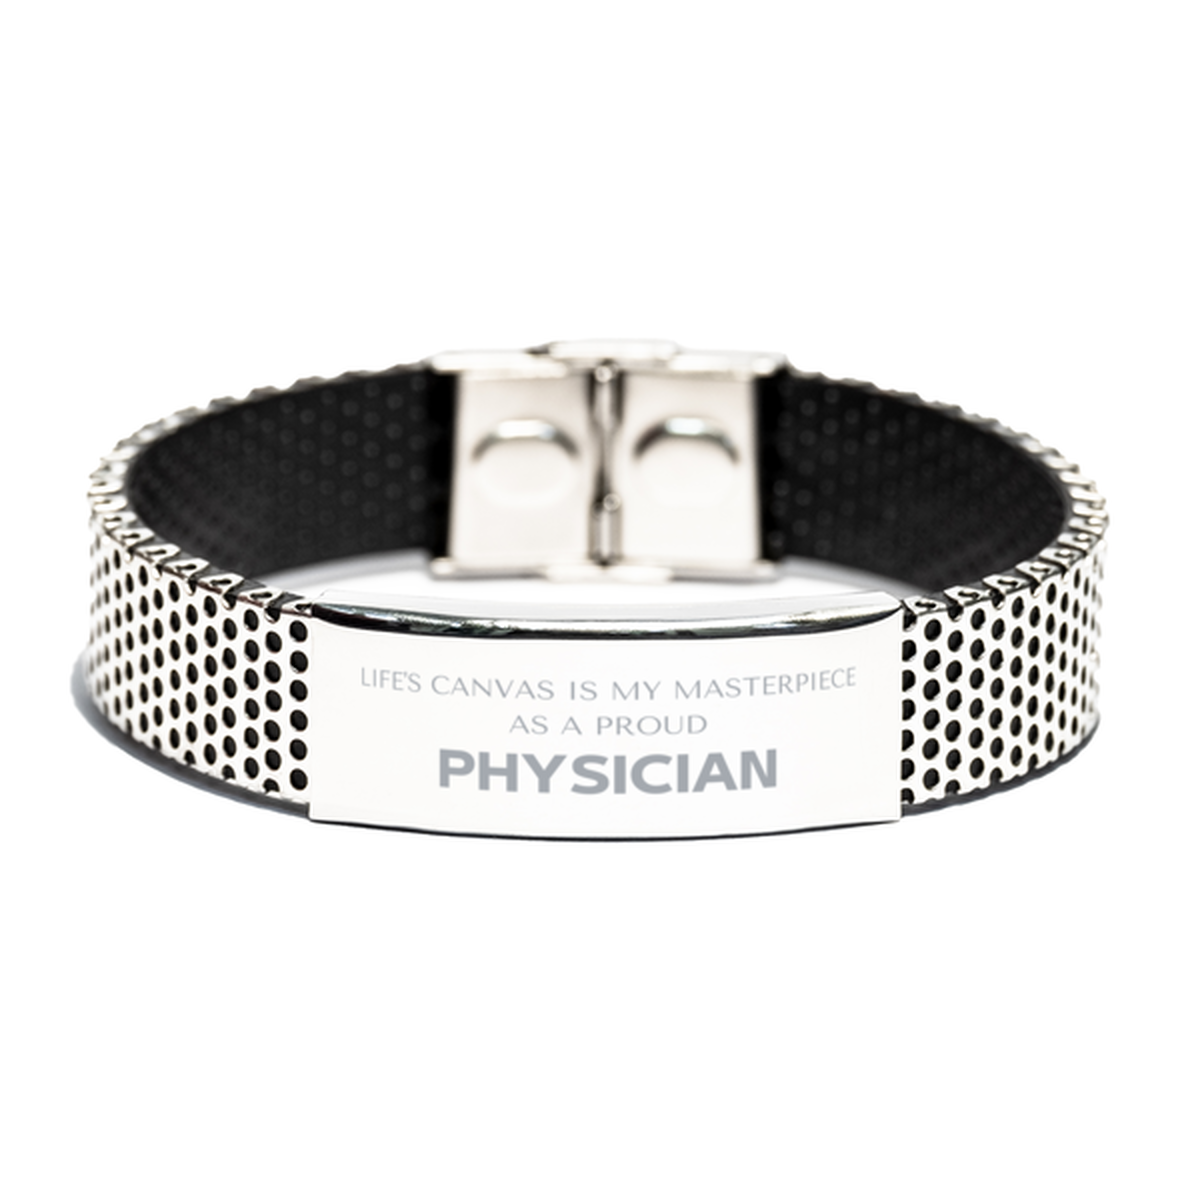 Proud Physician Gifts, Life's canvas is my masterpiece, Epic Birthday Christmas Unique Stainless Steel Bracelet For Physician, Coworkers, Men, Women, Friends